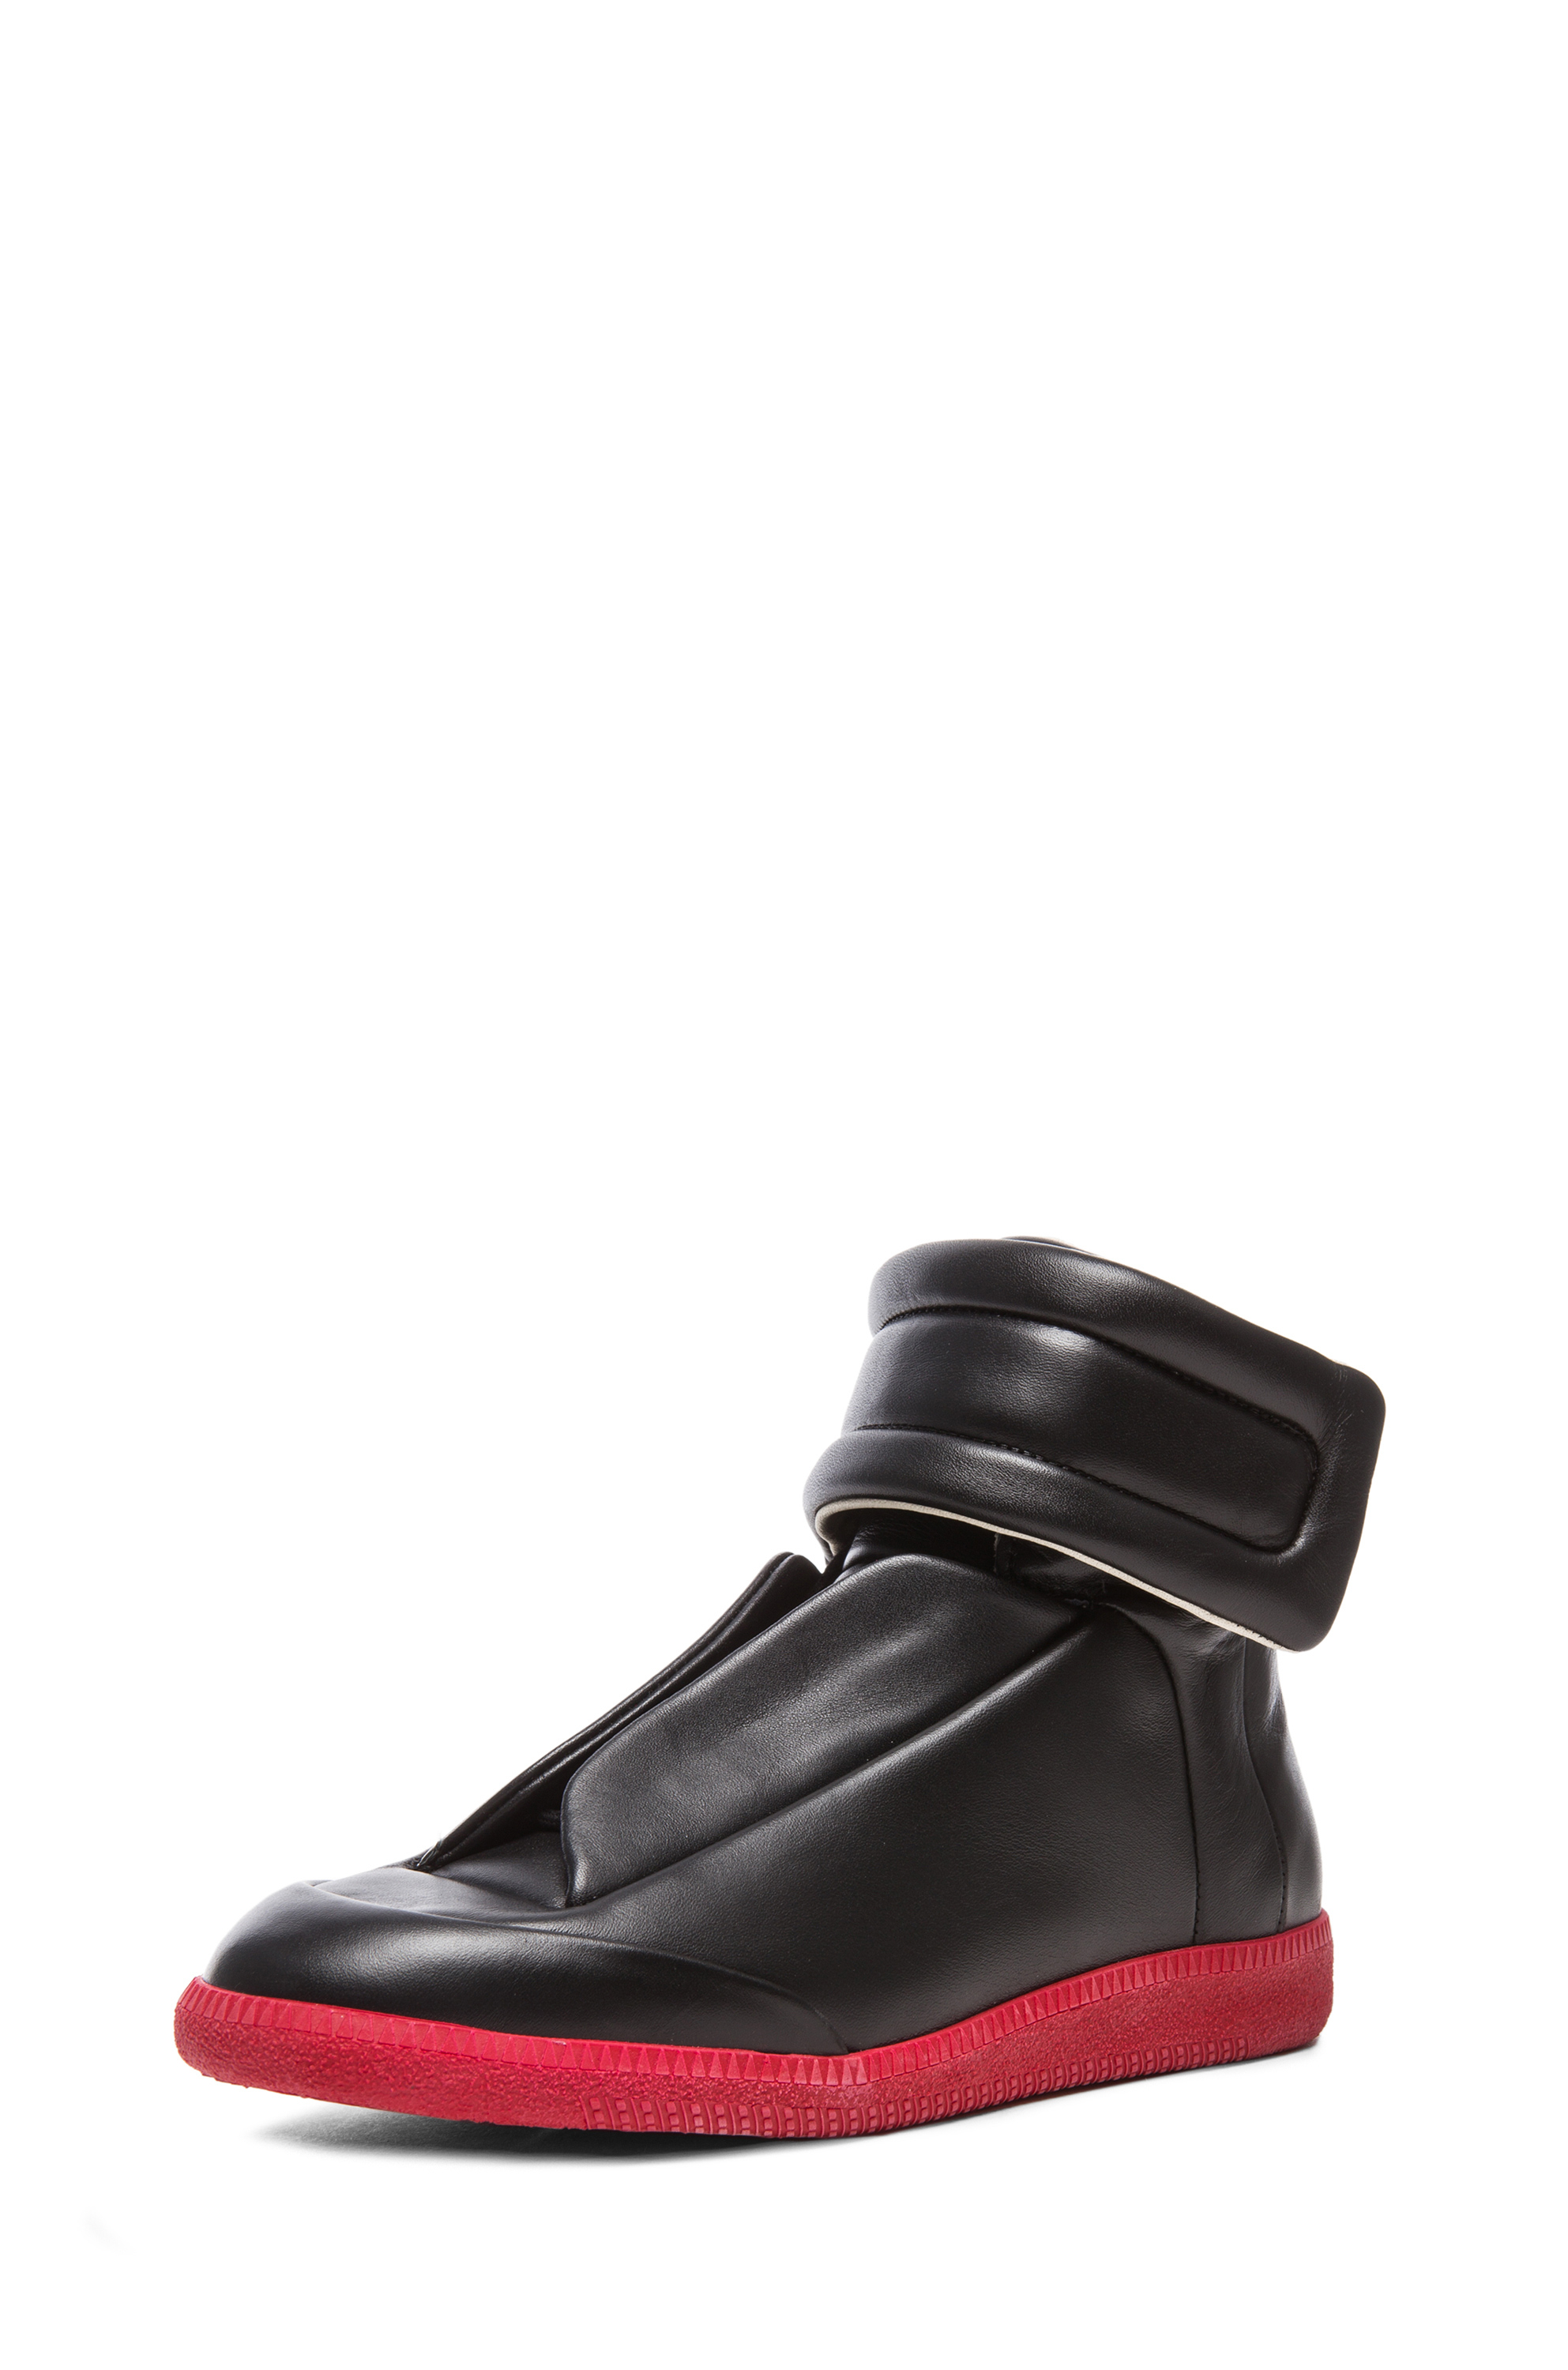 Maison Margiela Future High-Top Sneakers in Black for Men | Lyst